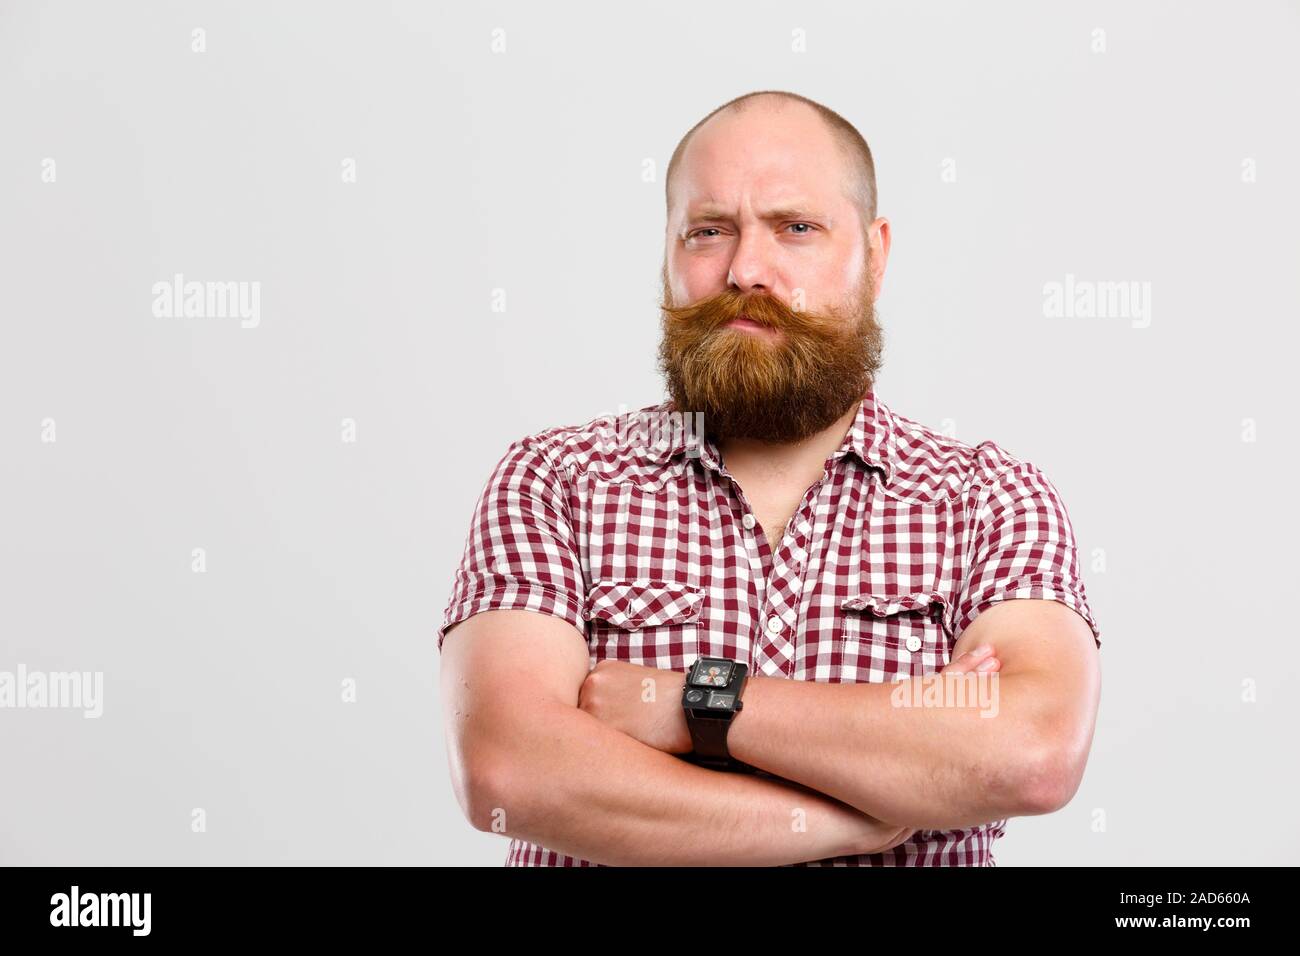 Doubting man with ginger beard Stock Photo